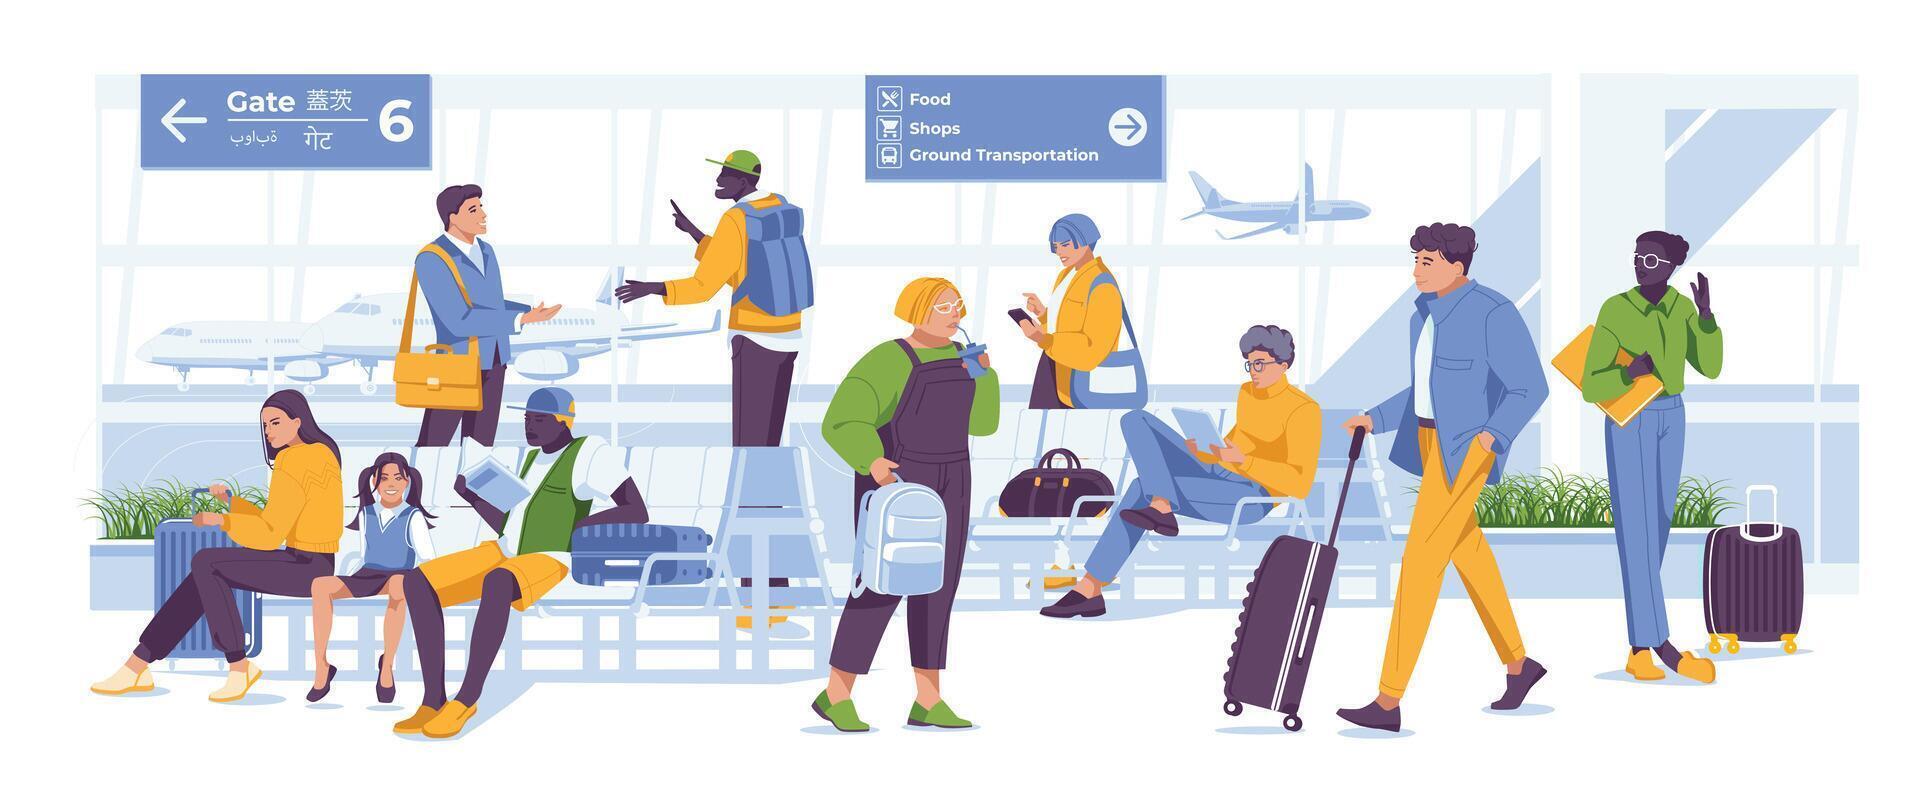 Airport waiting room. Service scene with different characters. Vector flat illustration. Travel by plane.